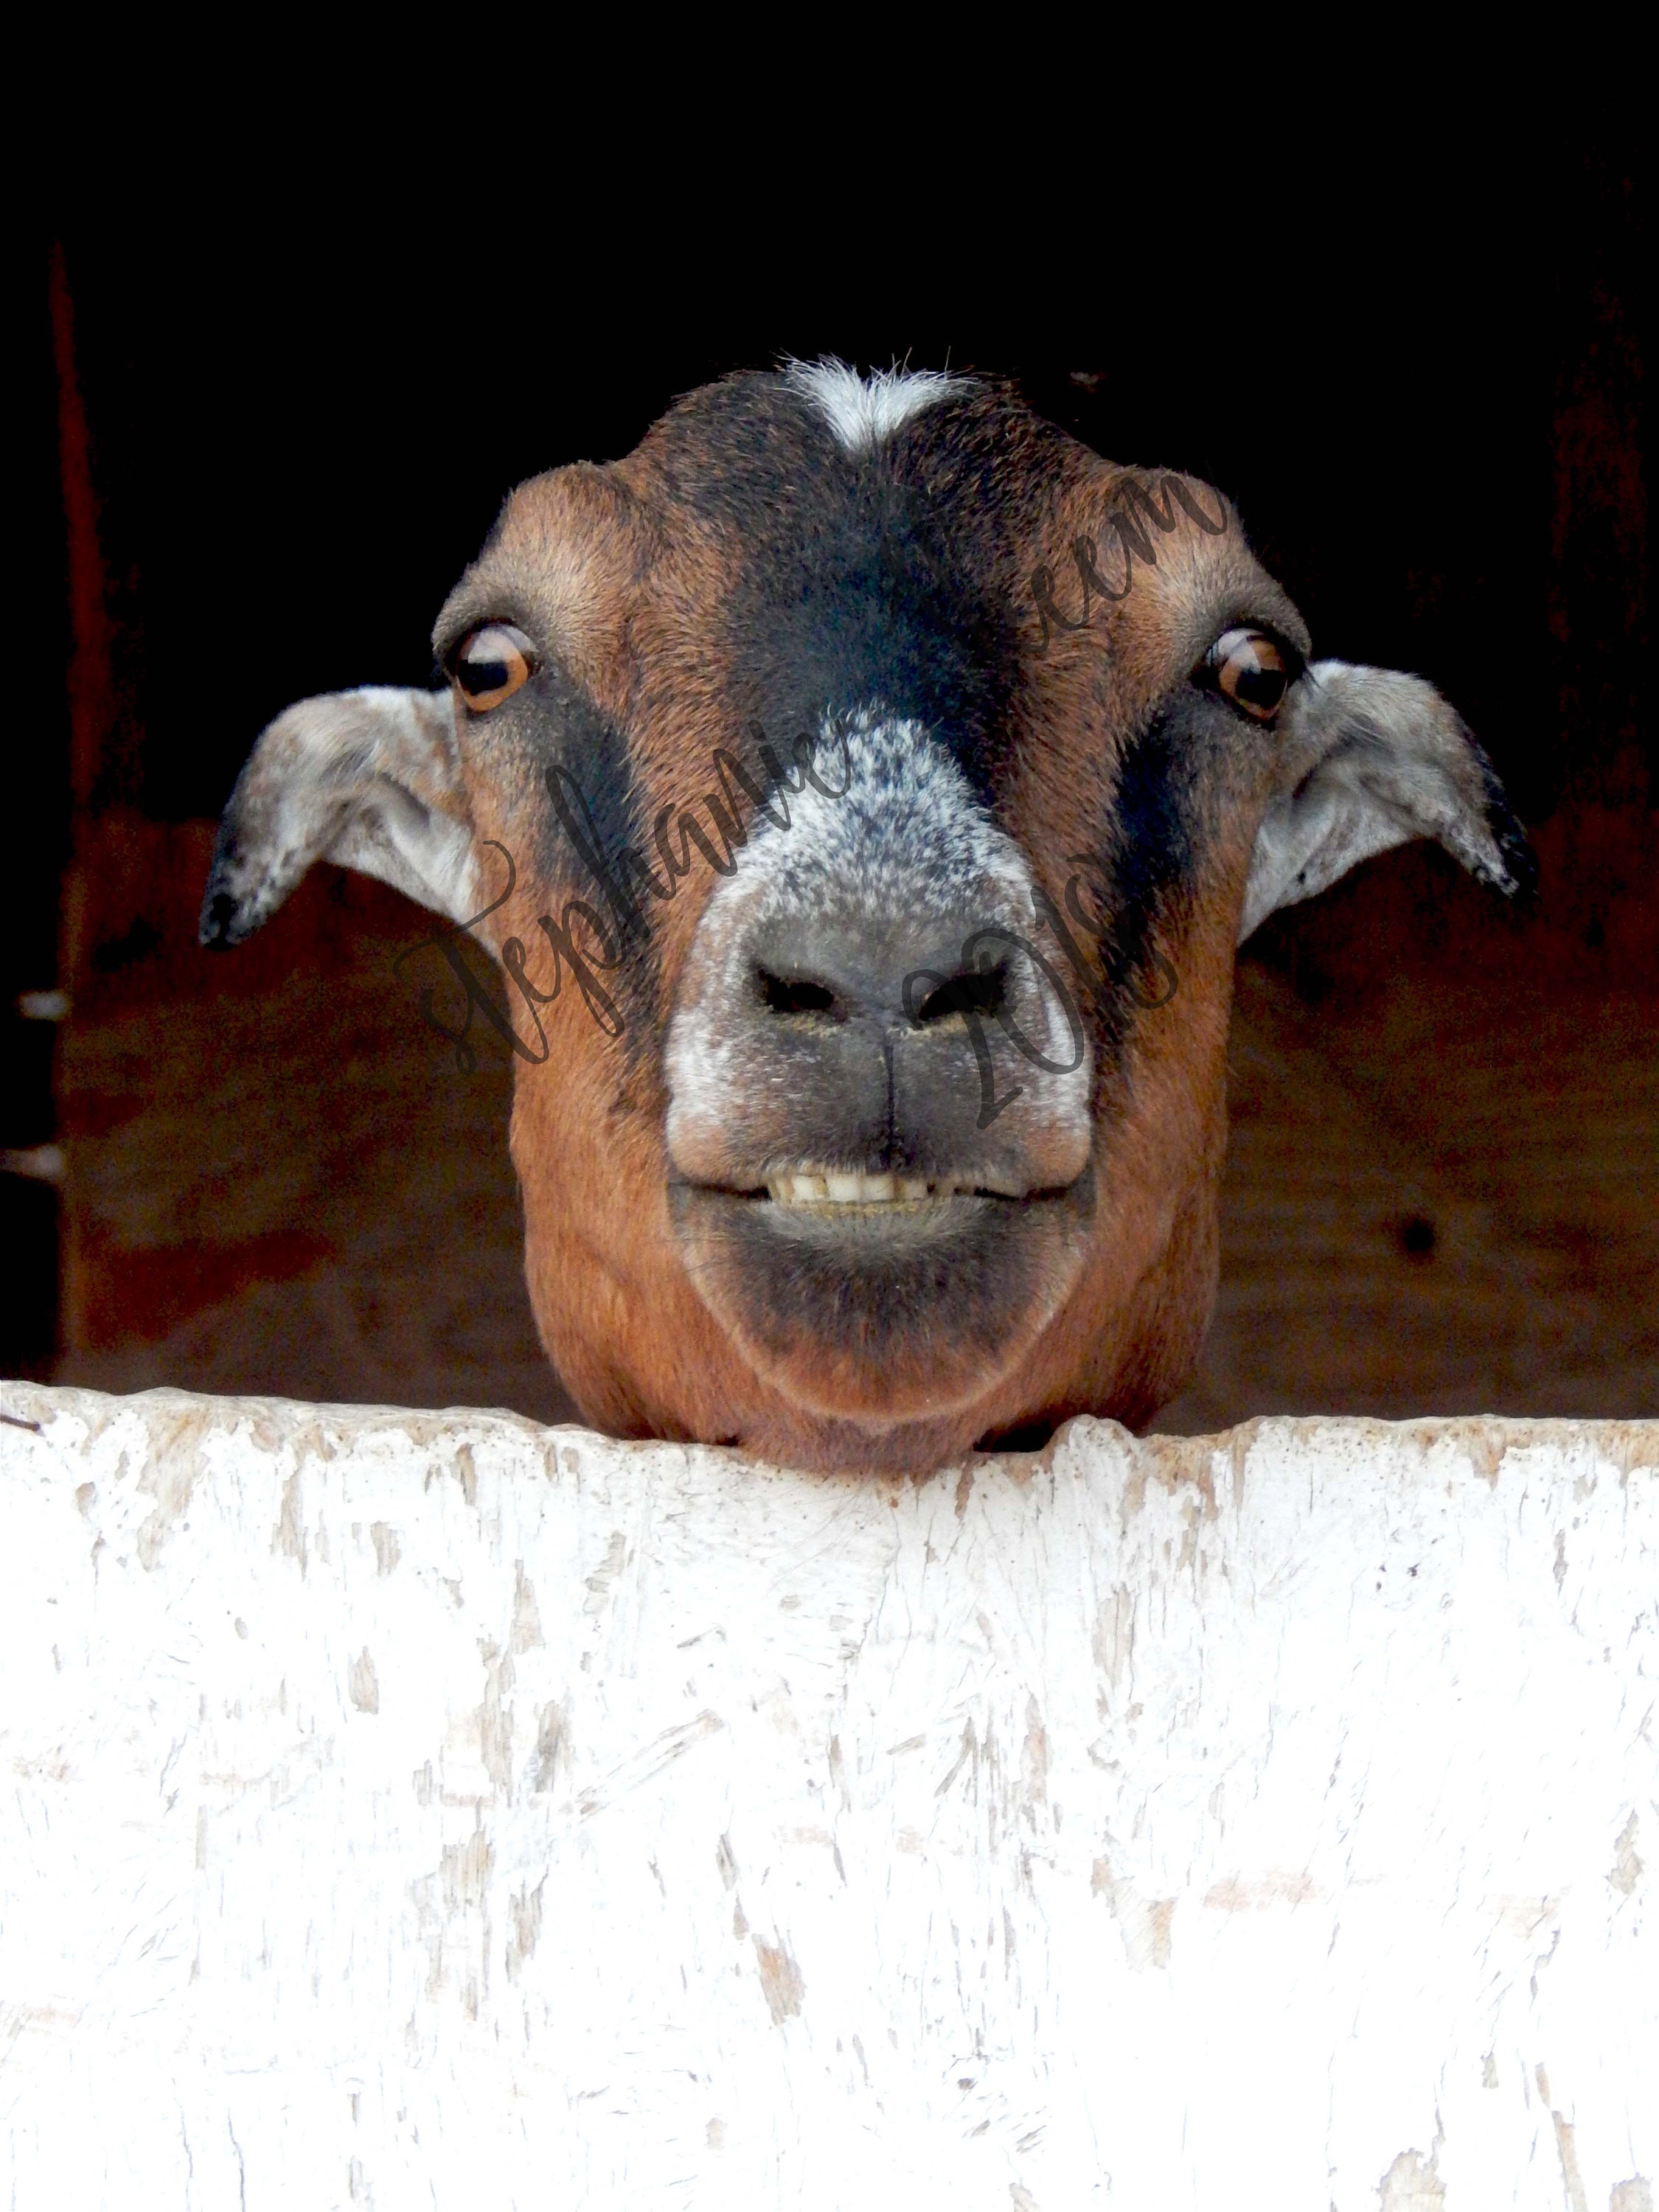 Smililng Goat Picture Happy Goat Funny Animal Image